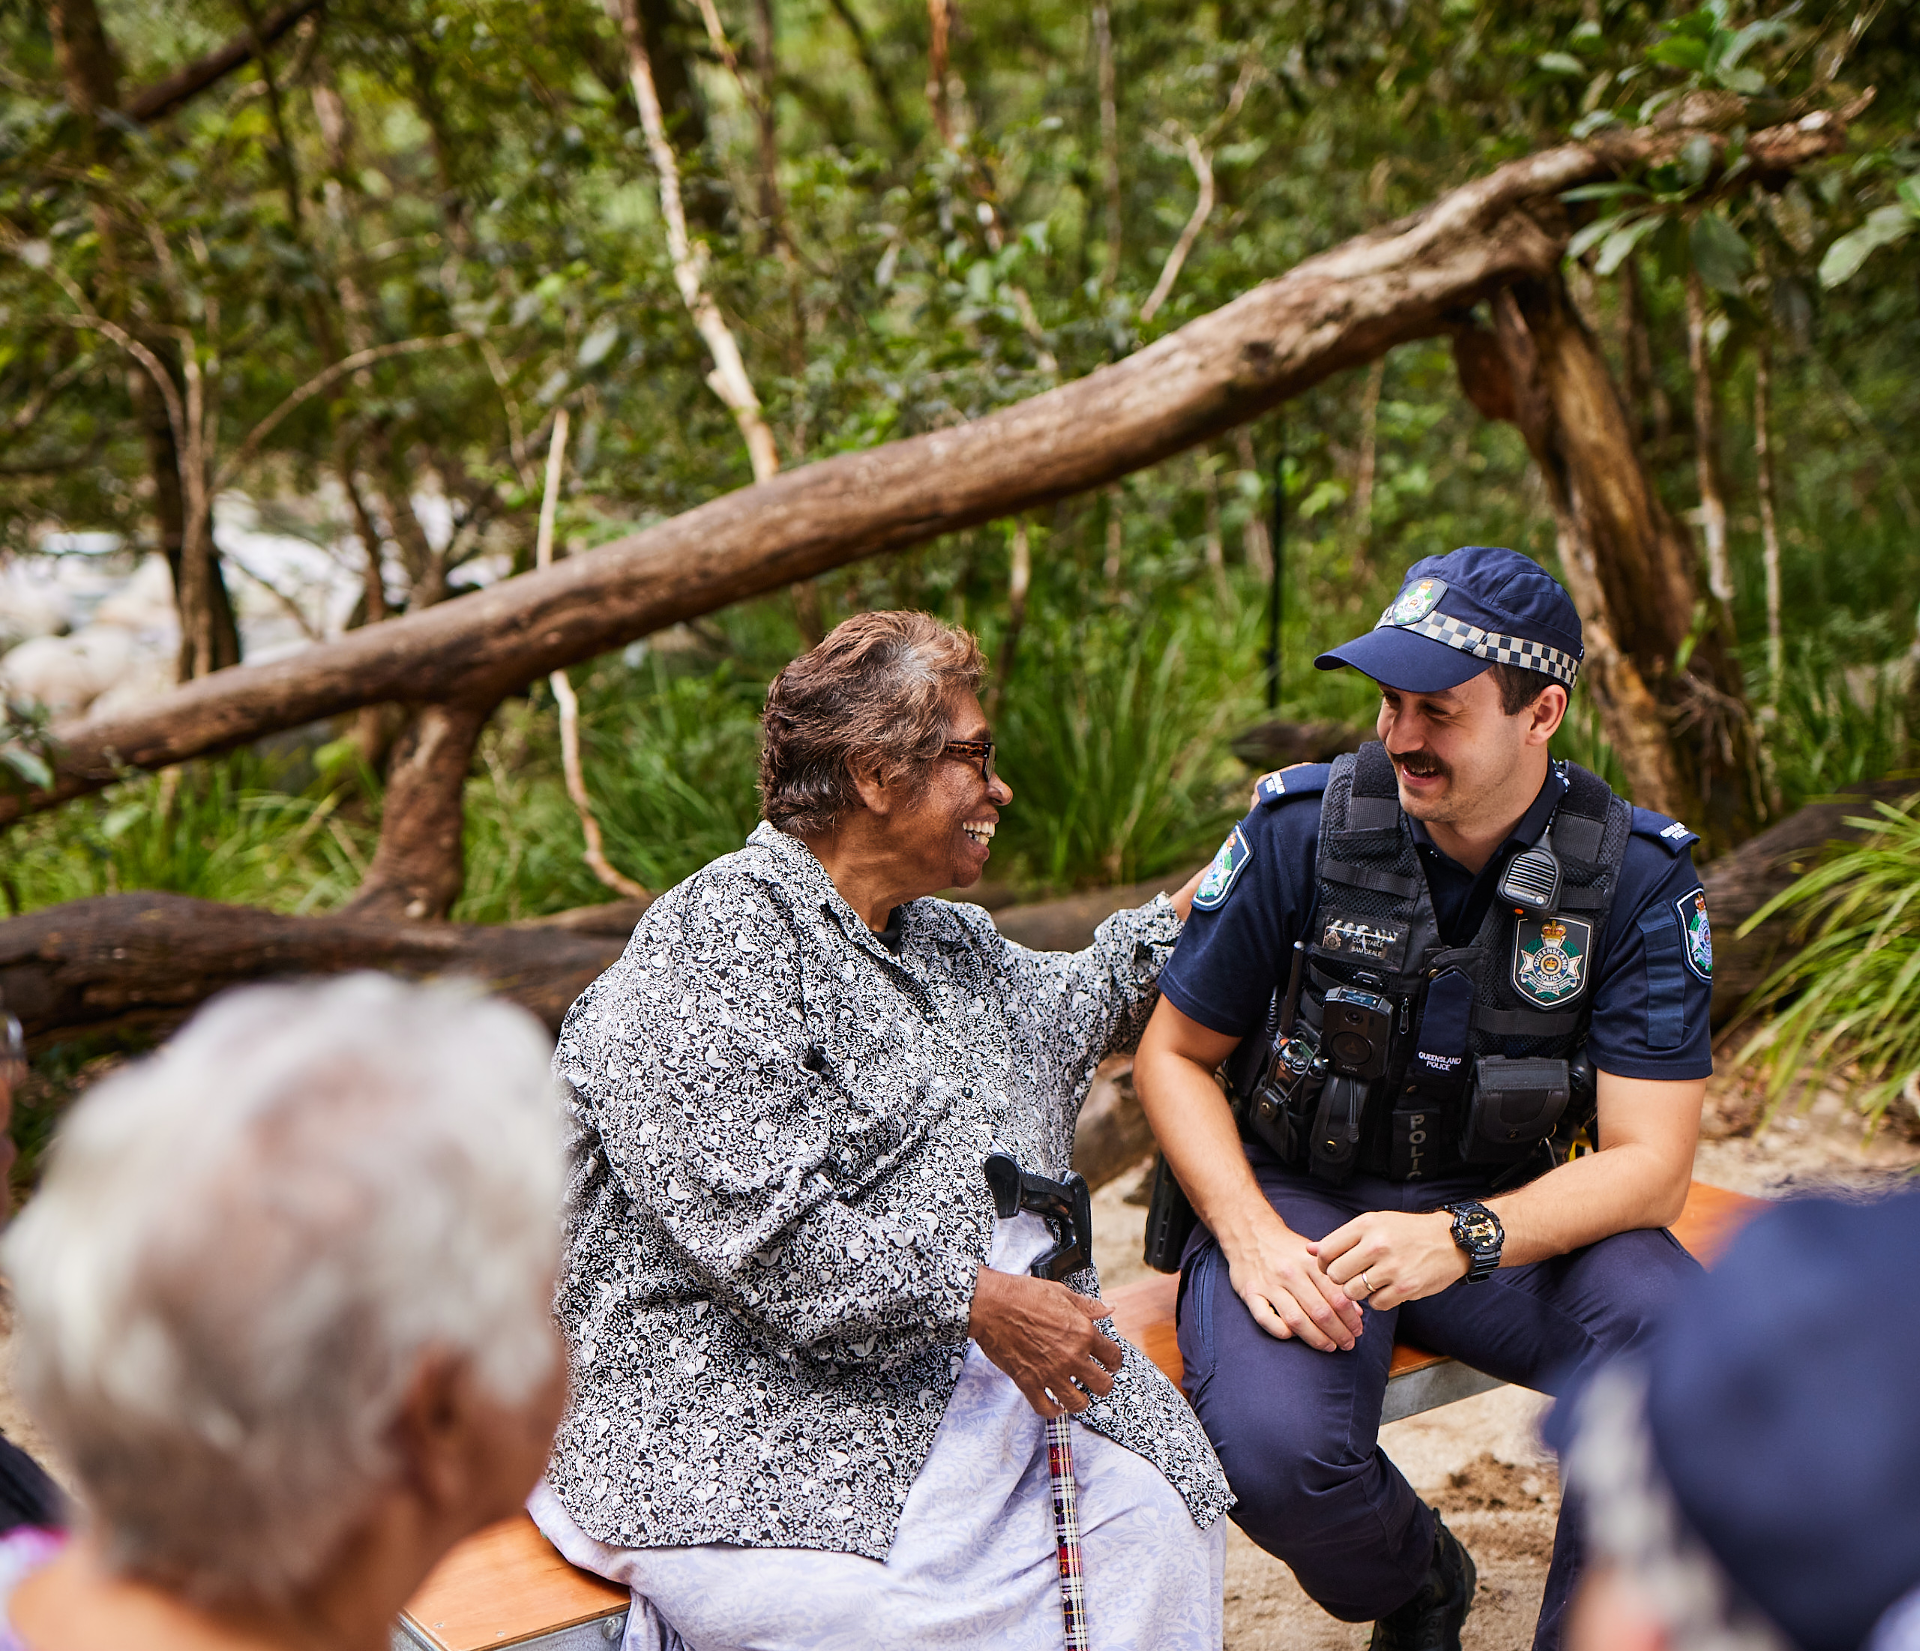 A group of people sat yarning with a police officer in a tropical rainforest setting